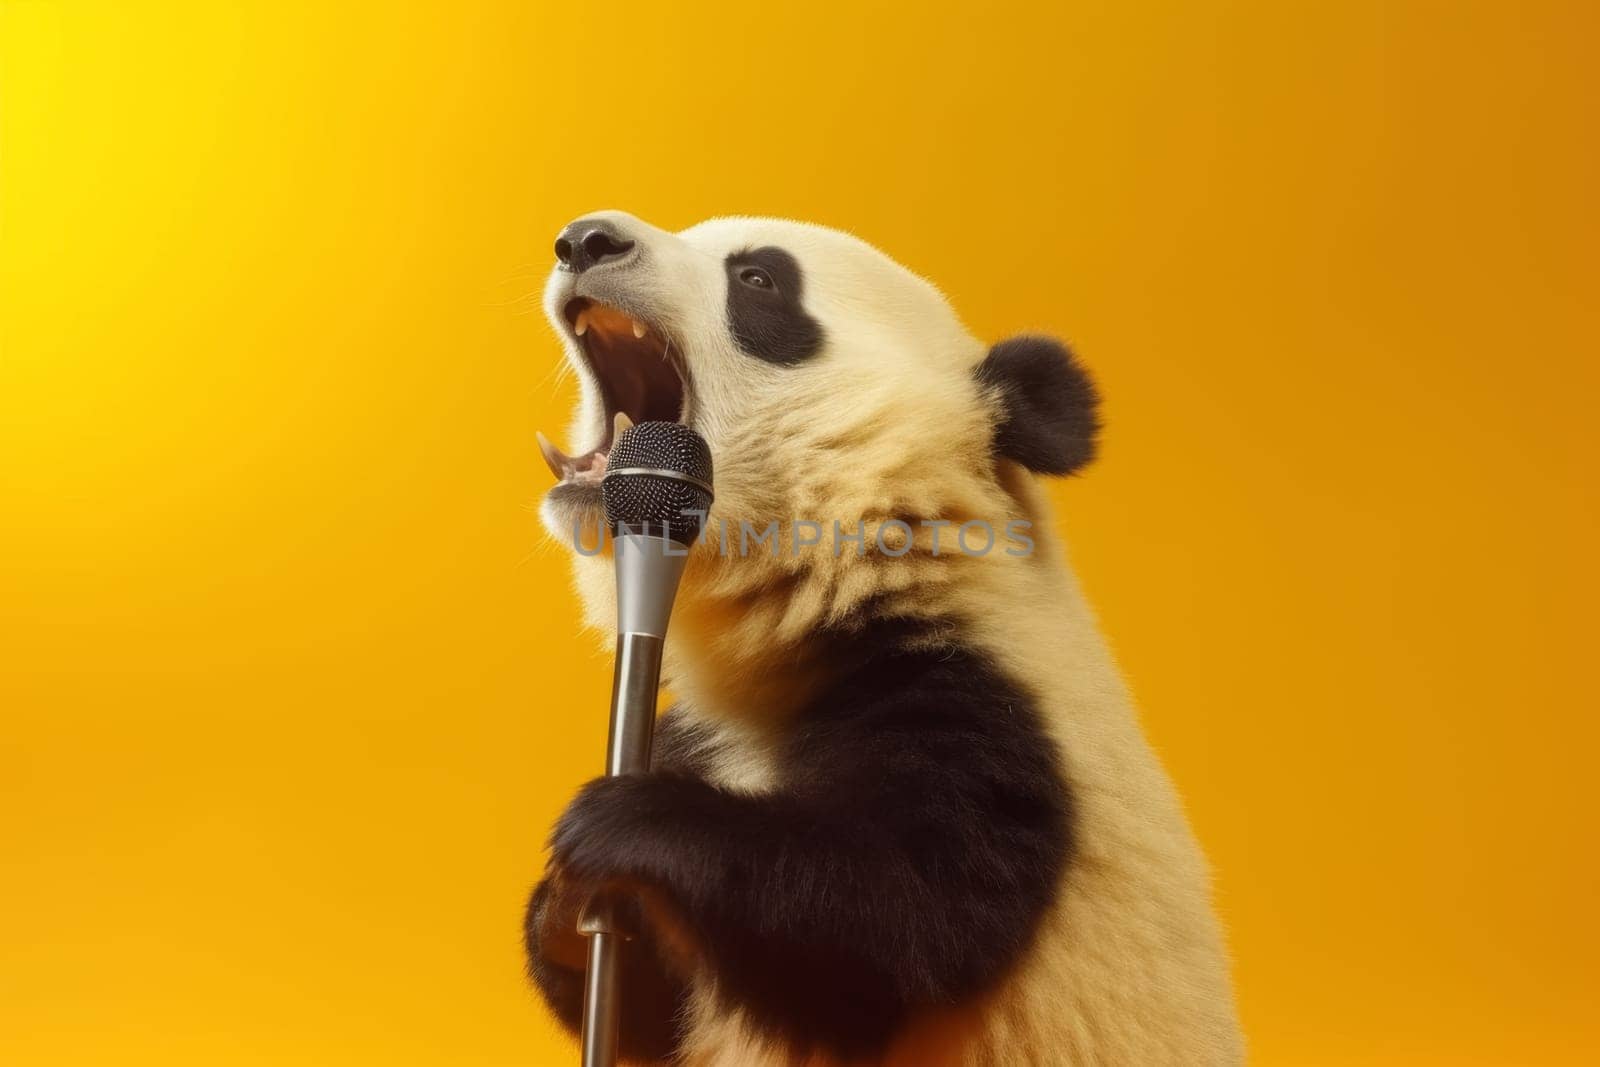 Singing Panda with Microphone on Stage by andreyz